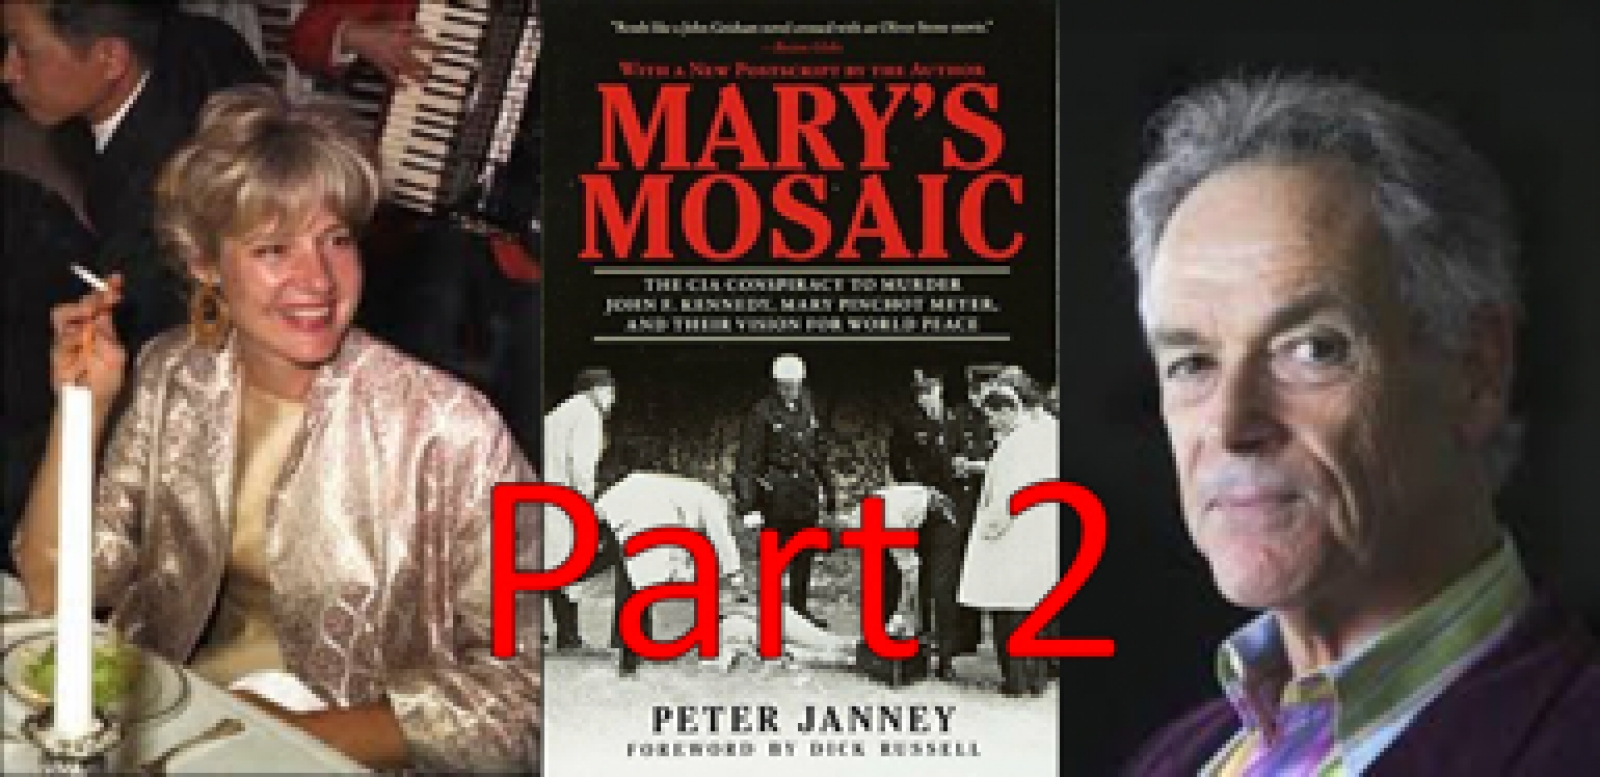 Peter Janney, Mary's Mosaic (Part 2)